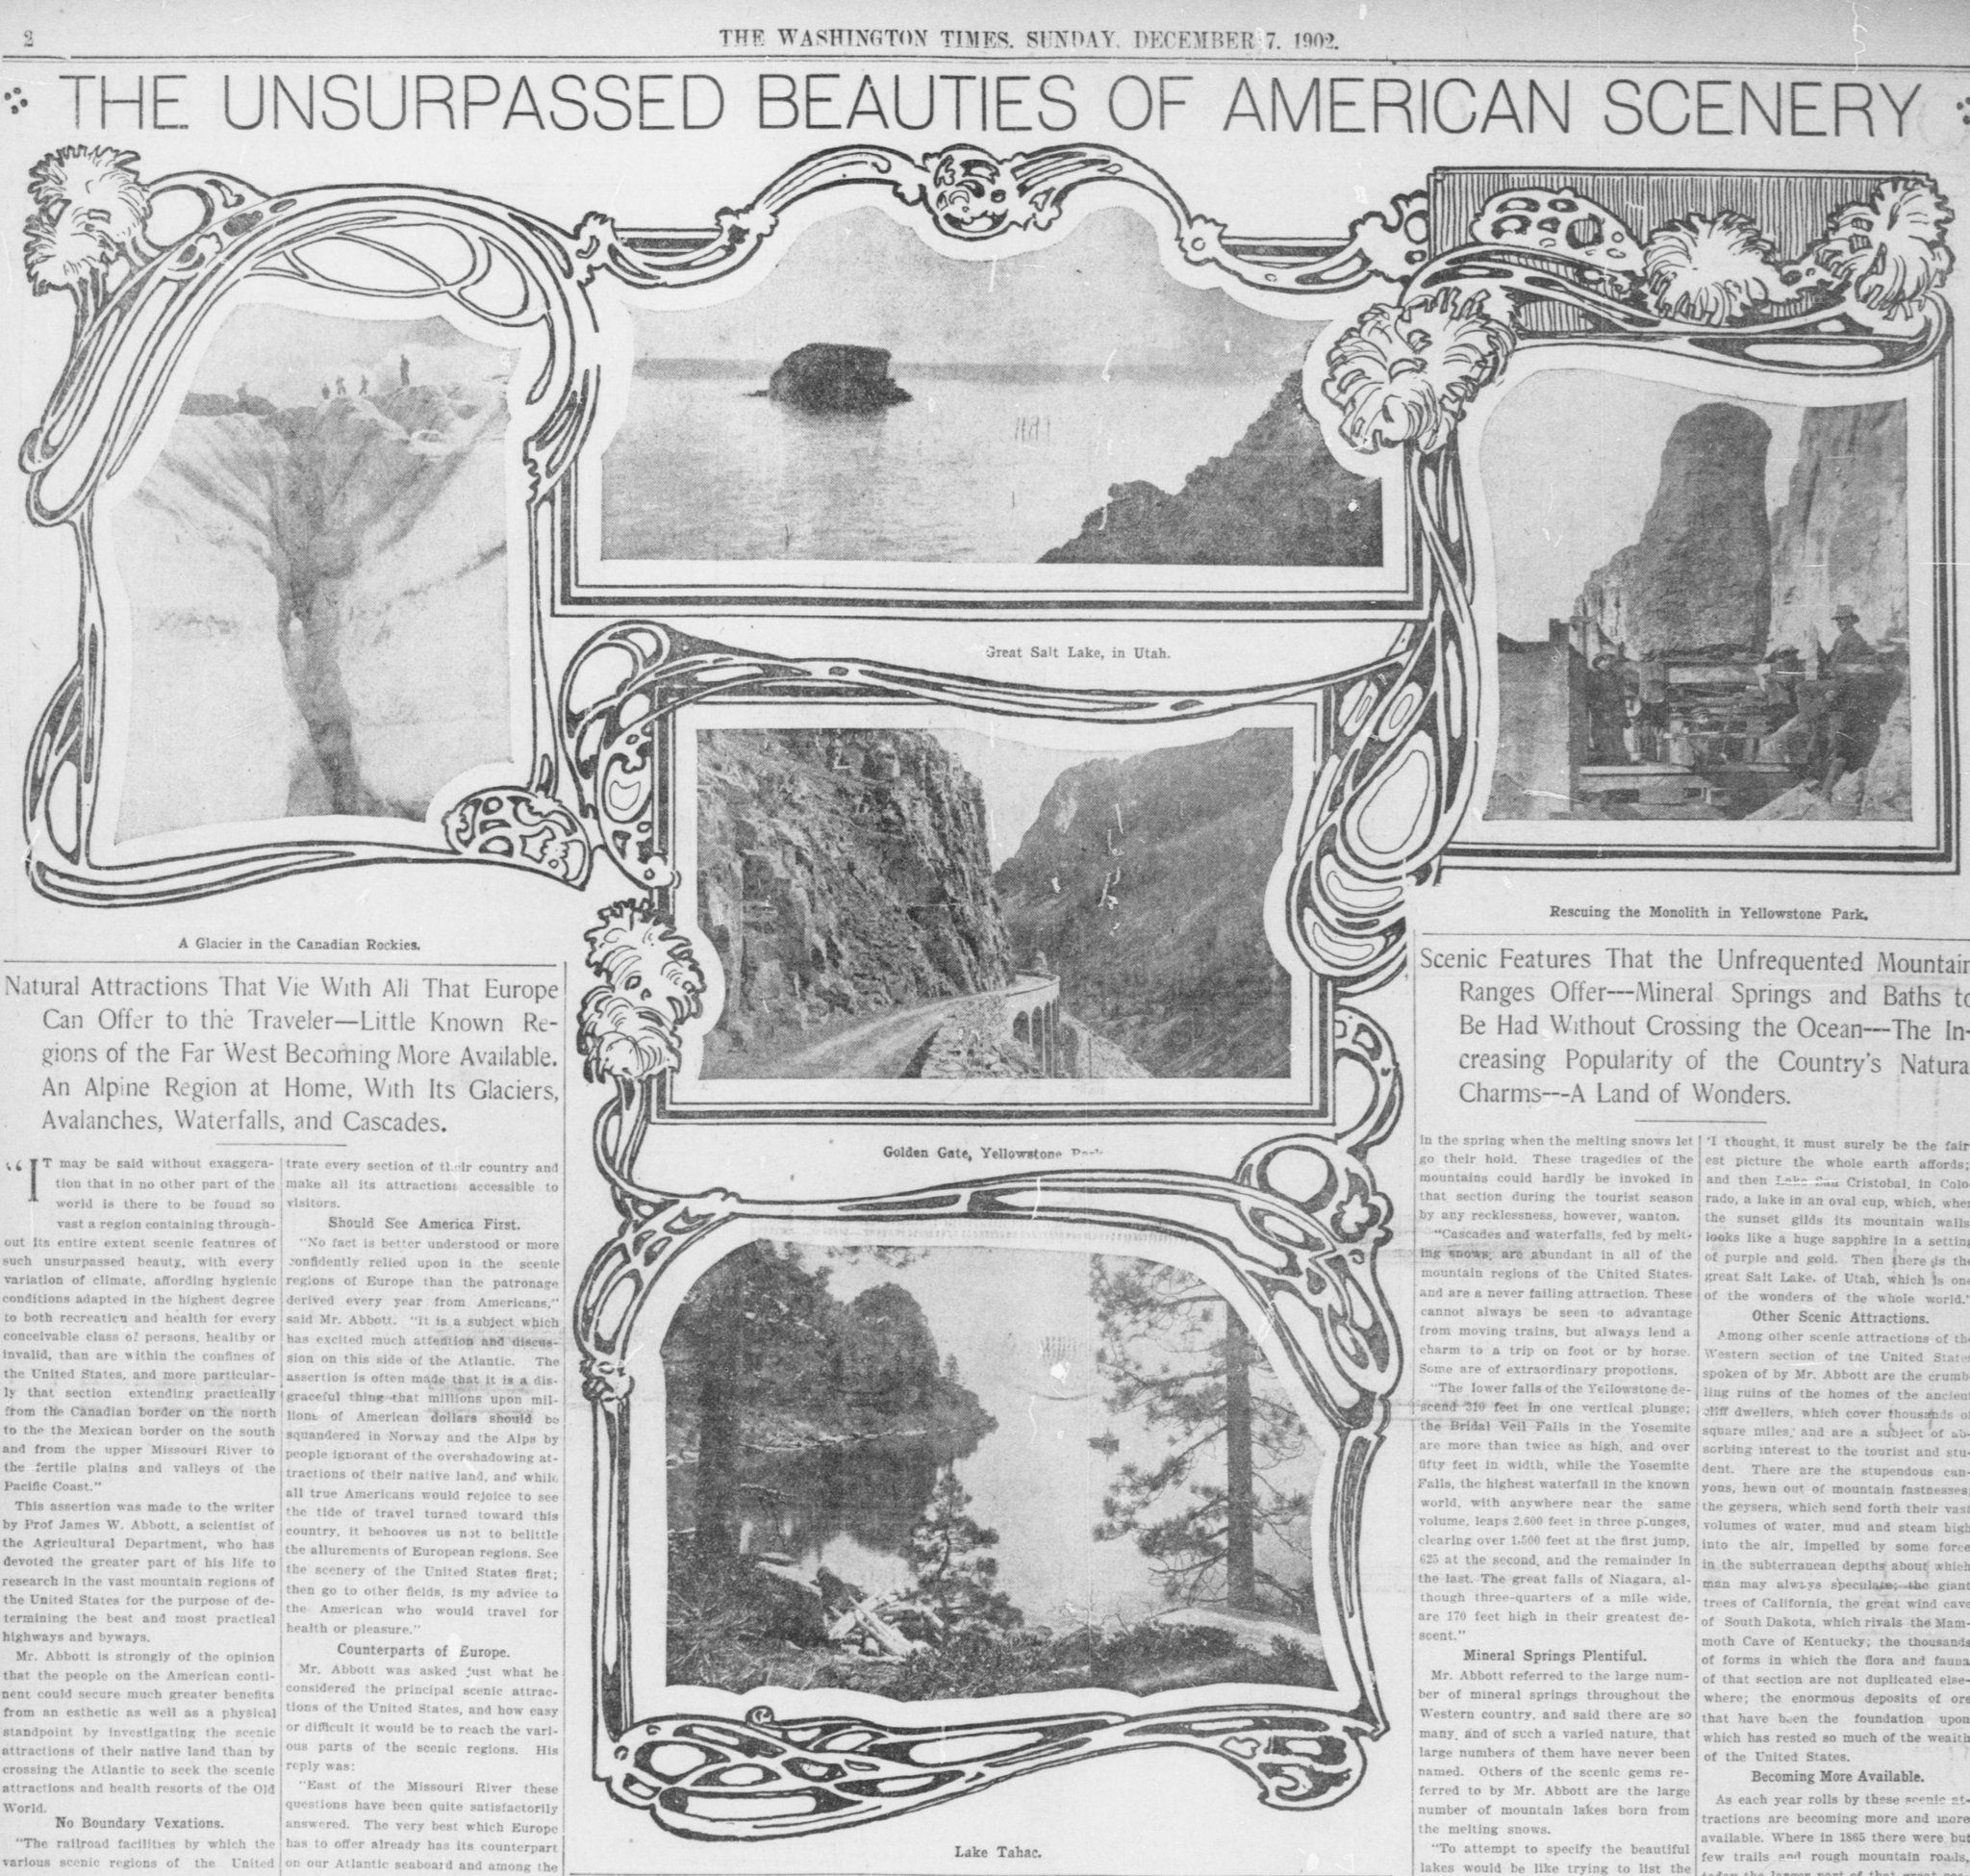 Library Of Congress This Newspaper Clipping From 1902 Features Beauties Of American Scenery And Is Perfect For A Virtual Summer Road Trip Nationalparkandrecreationmonth Chronamparty T Co Wqbmezzkcm T Co T5sitp8rb4